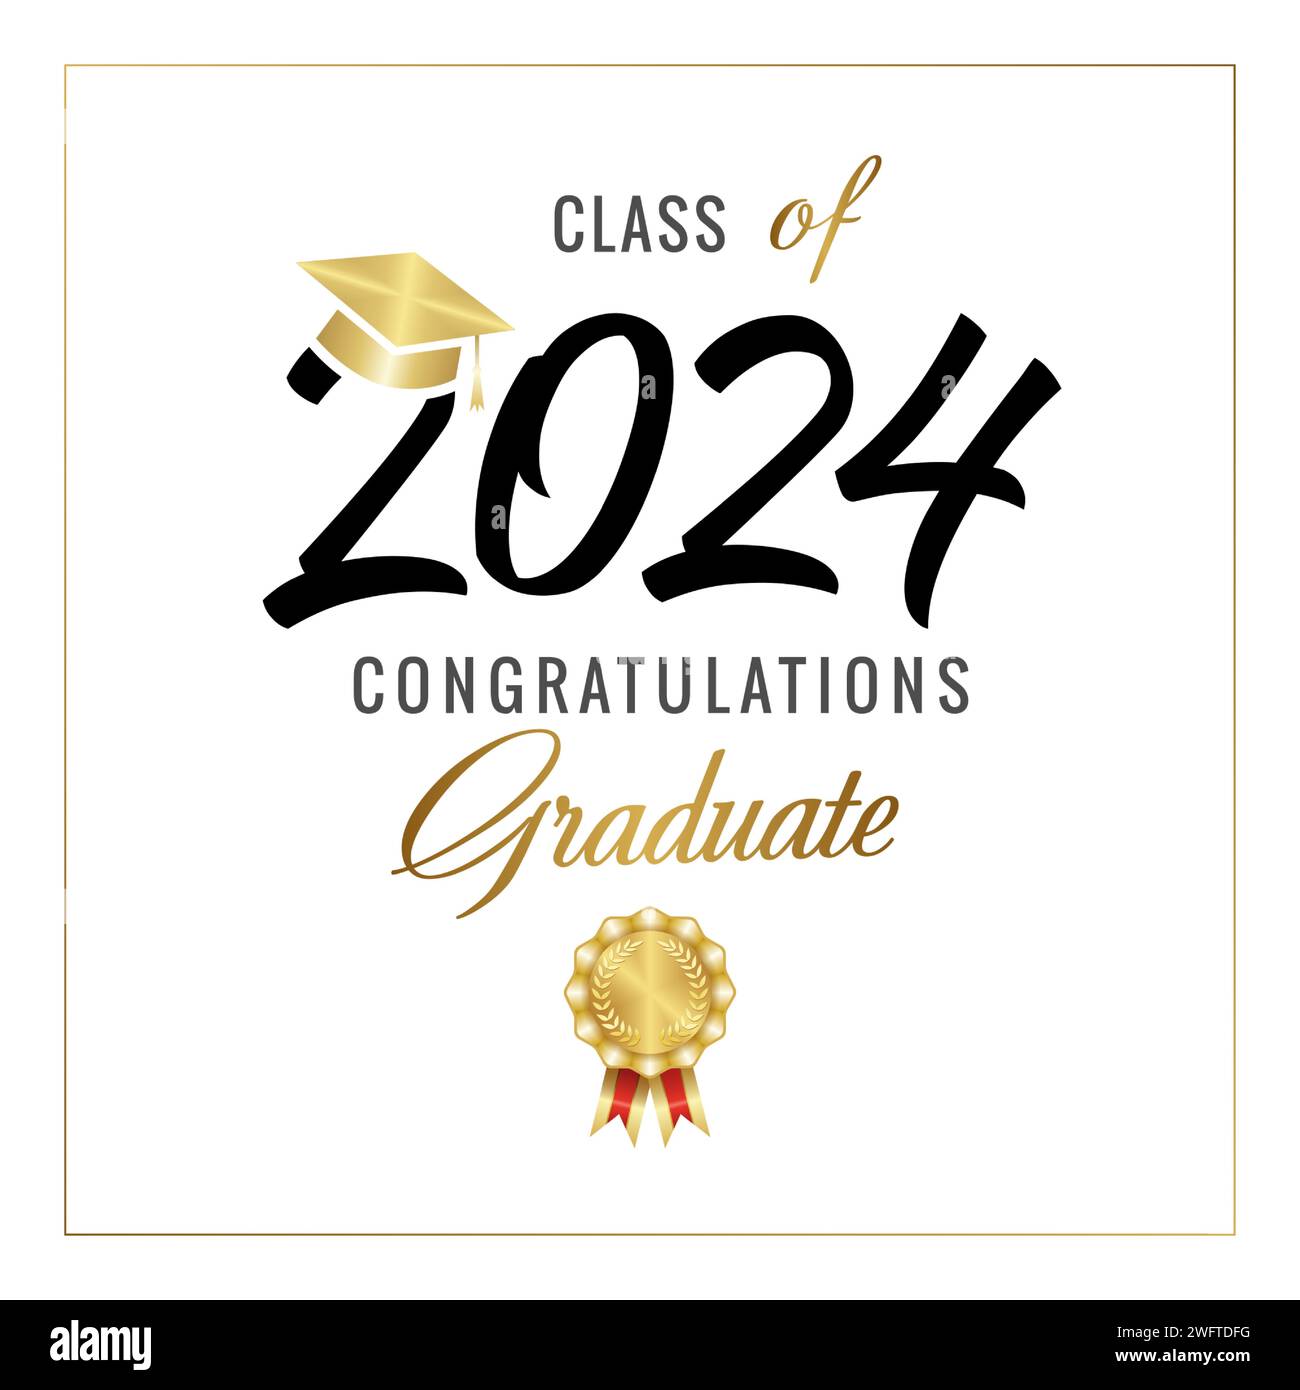 Class of 2024 congratulations graduate certificate concept. Diploma design. School banner. Black and gold elements. Shiny golden medal and square cap. Stock Vector